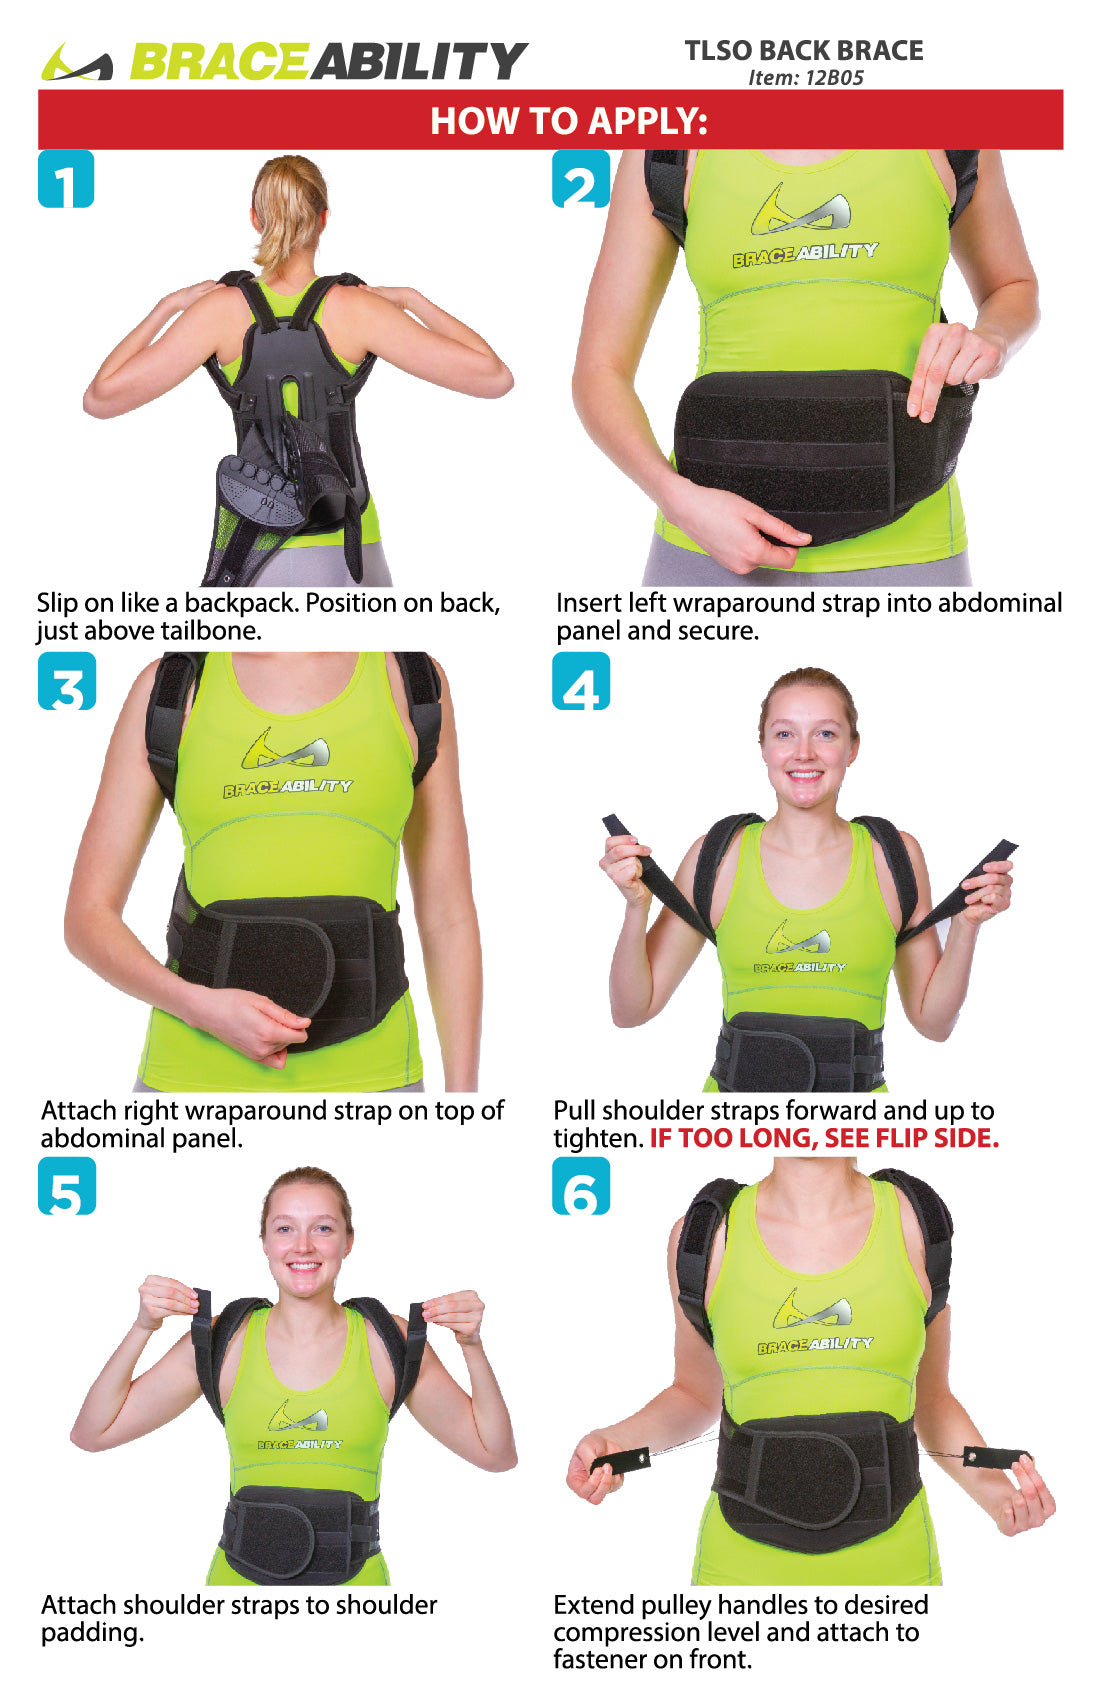 How Does a Back Brace Work?